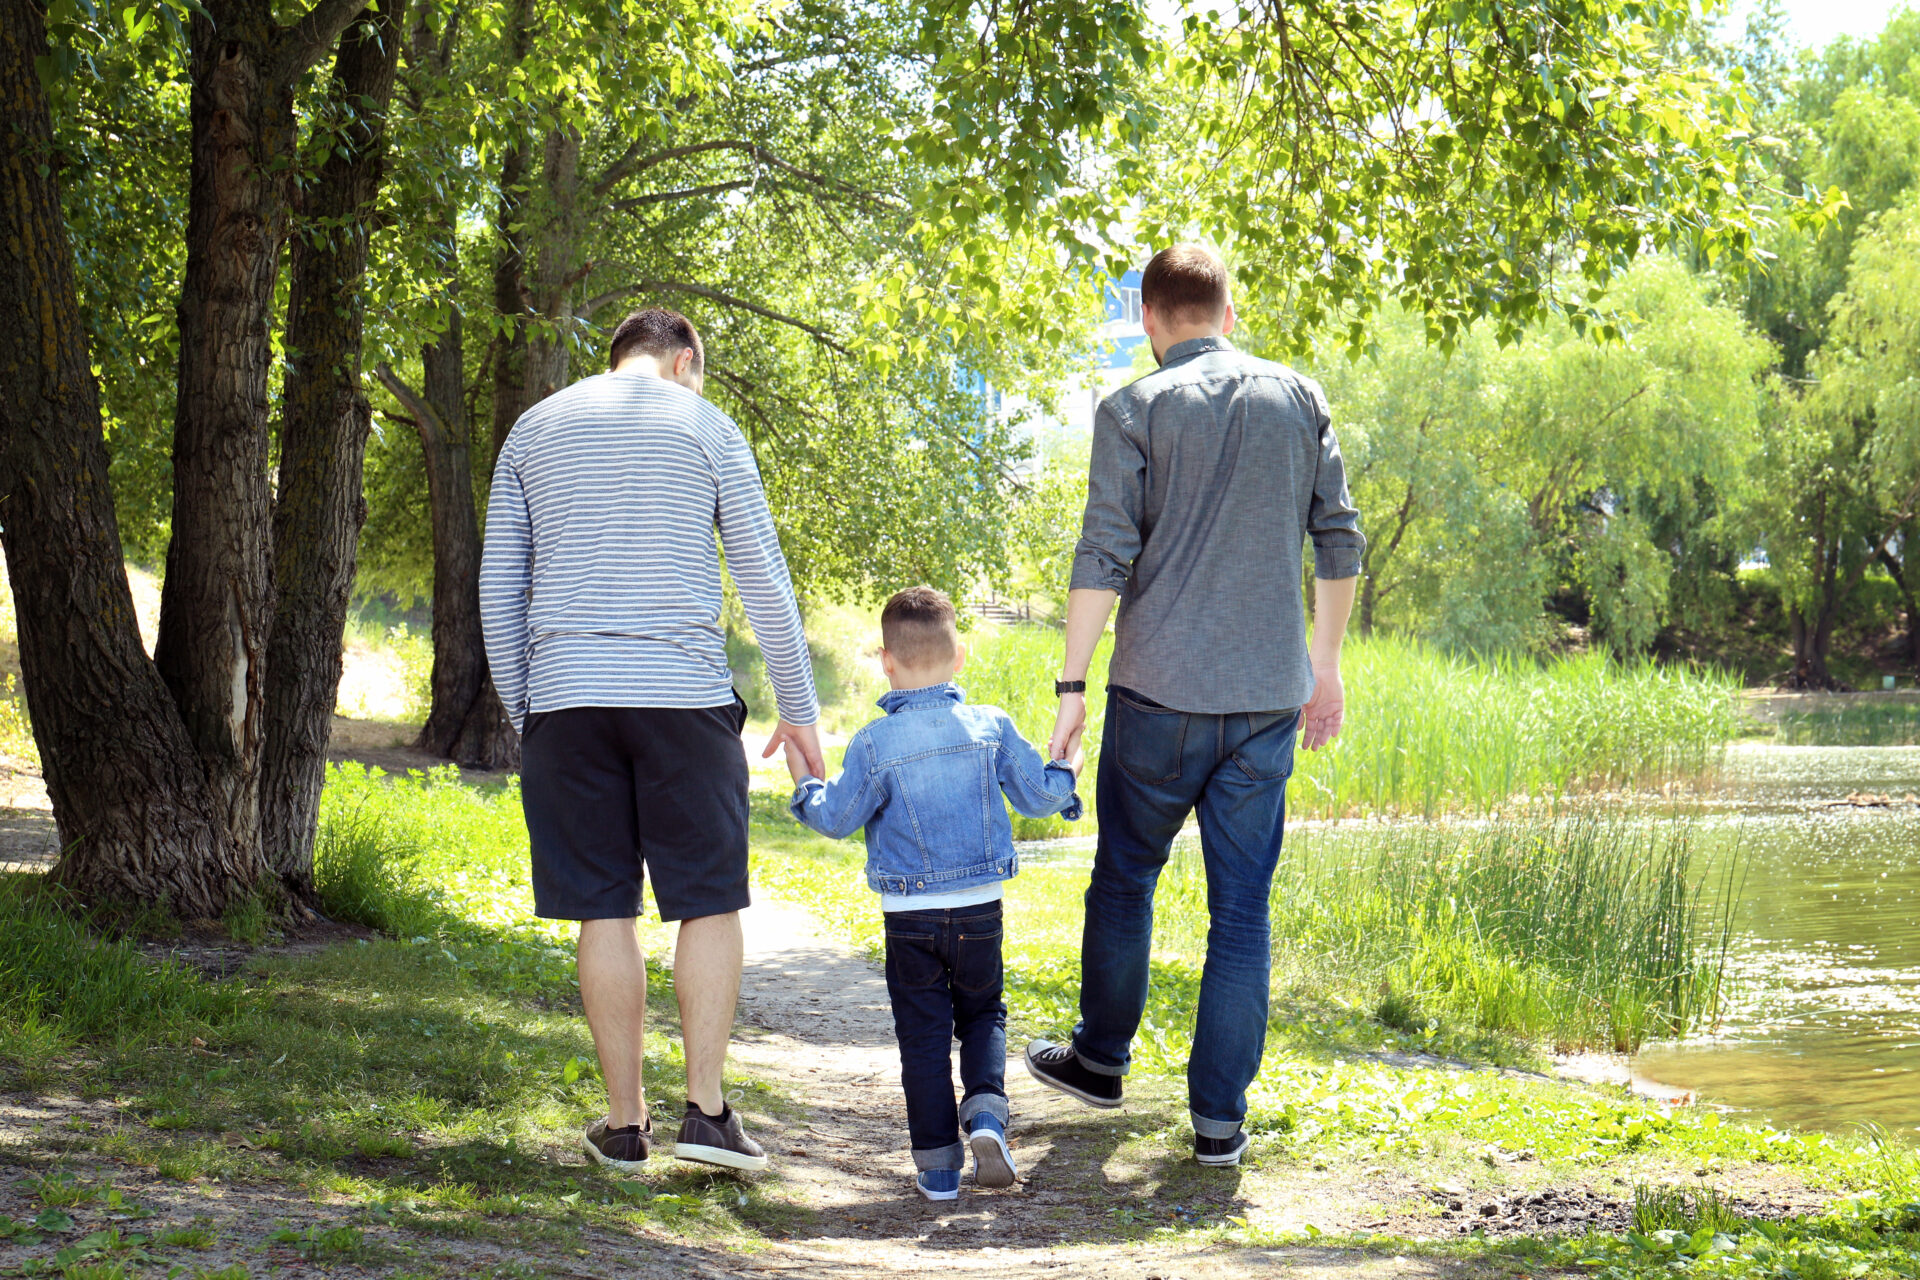 Couple coping effectively with OCD, walking outdoors with their son